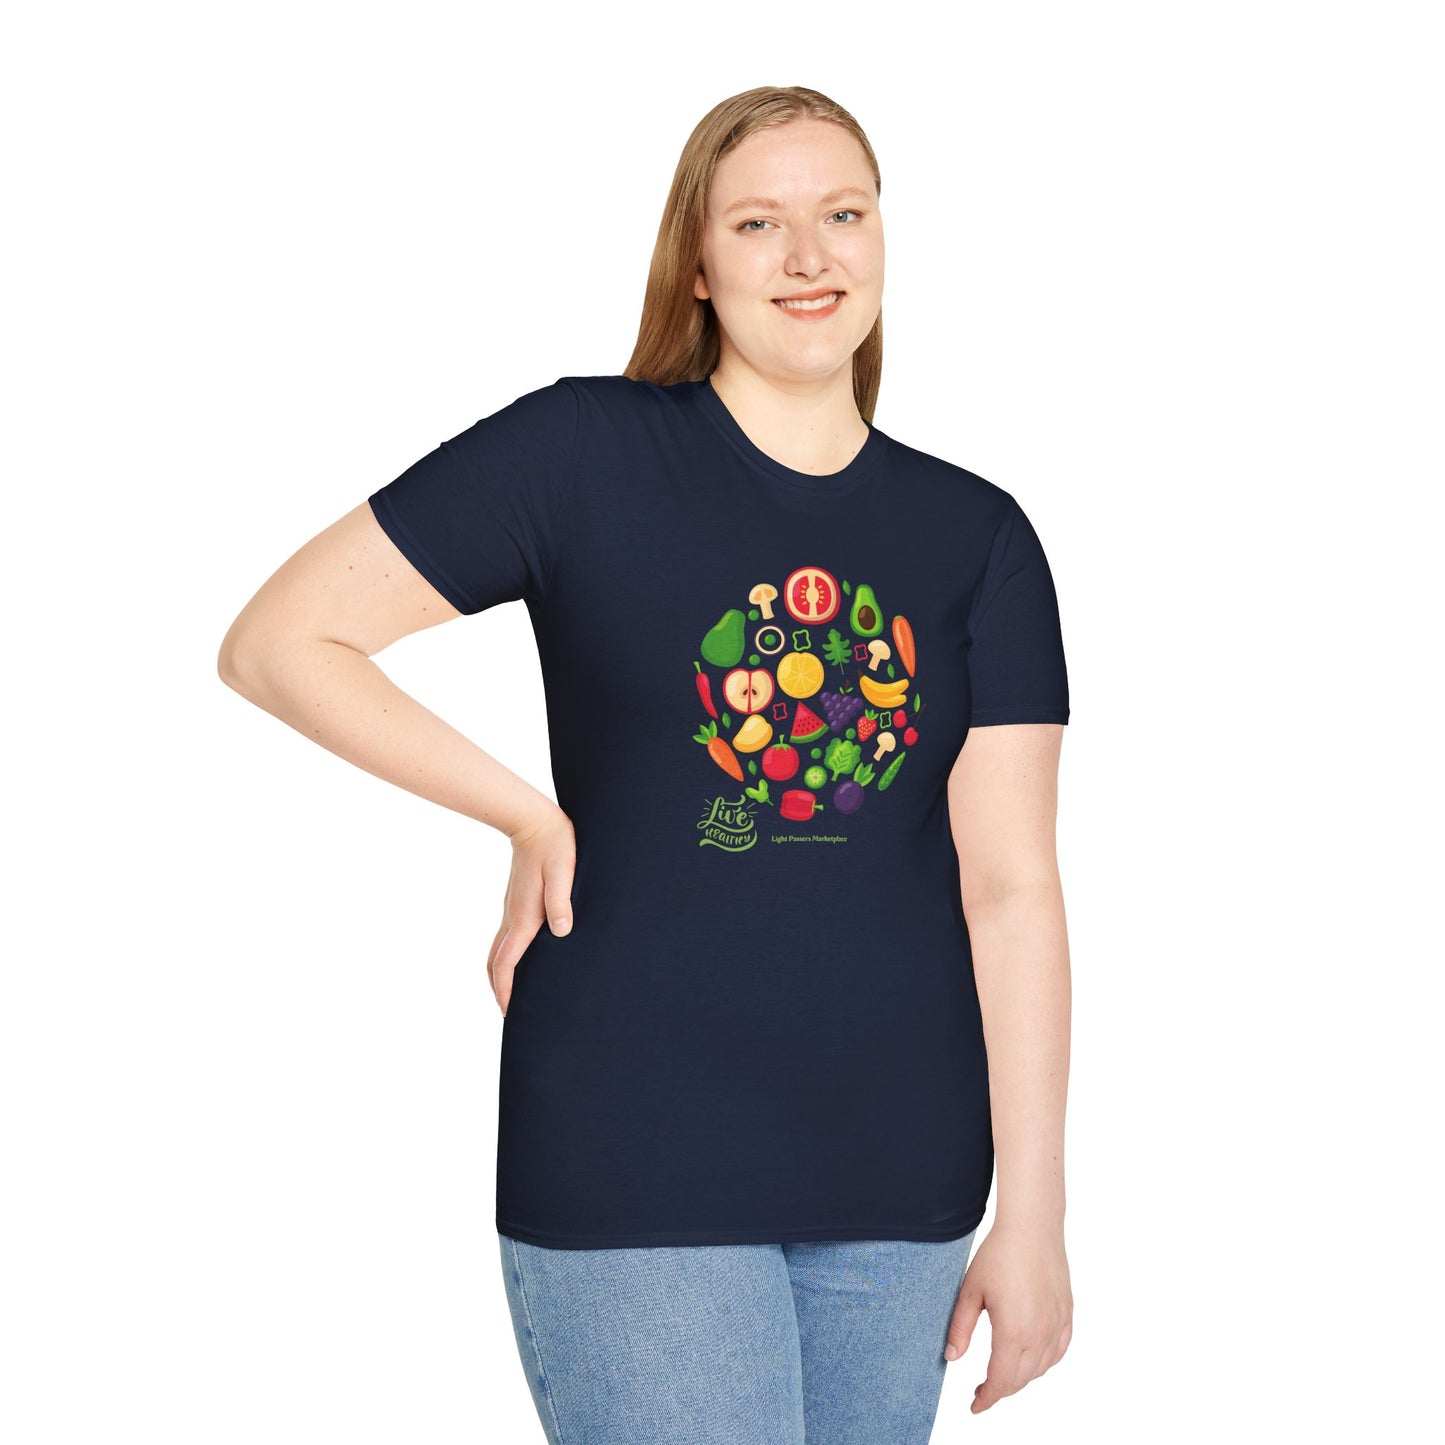 A woman in a Live Healthy Unisex T-Shirt with a fruit design, paired with blue jeans, posing with a group of fruits and vegetables. Made of soft 100% cotton, featuring twill tape shoulders and ribbed collar.